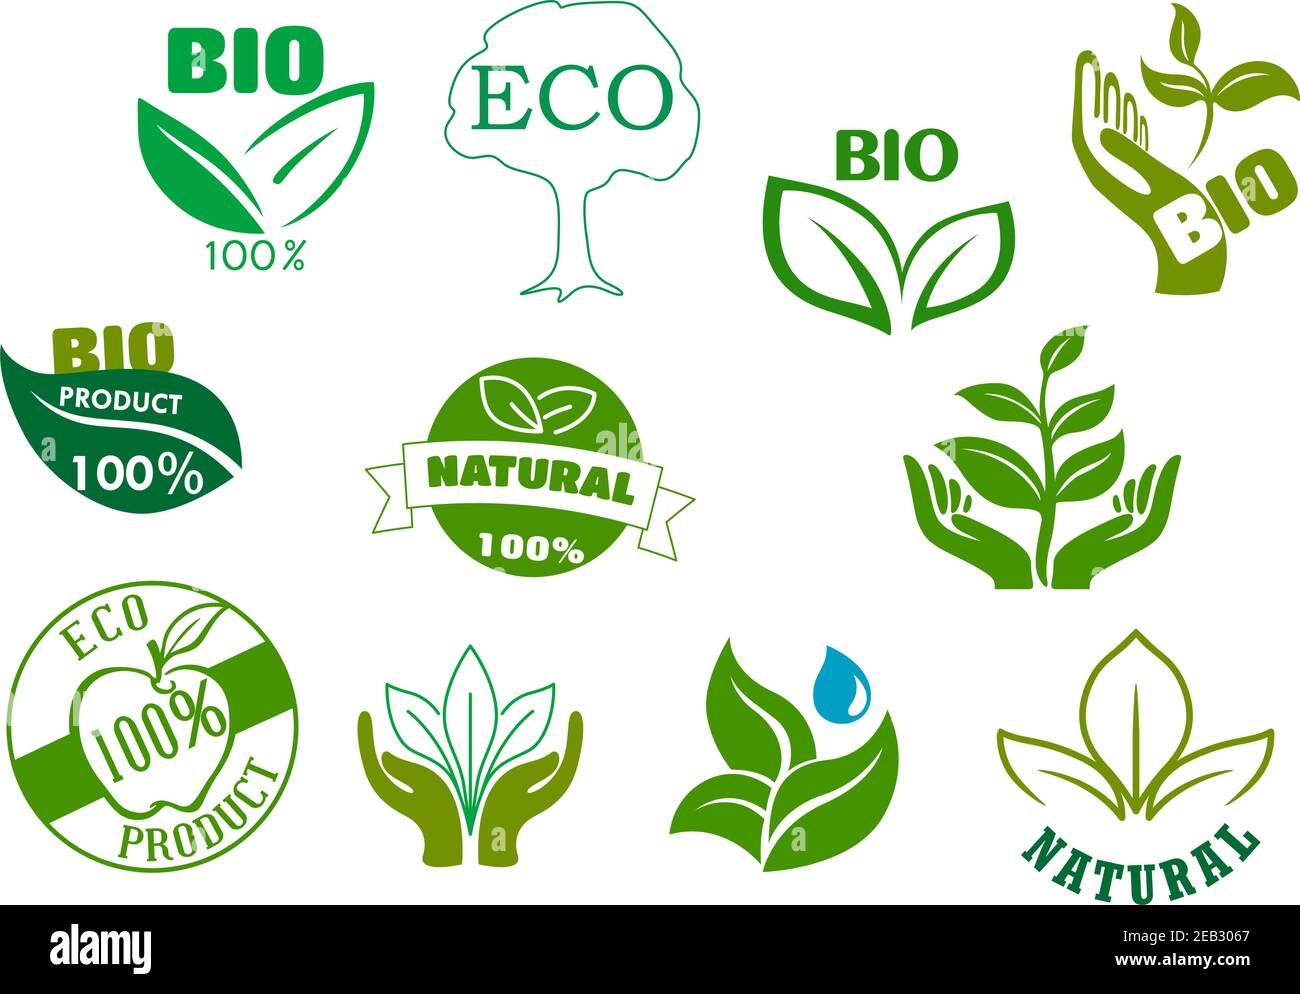 Bio, eco and natural products symbols with green leaves in hands, water drops, healthy organic apple fruits and tree. For food package design Stock Vector